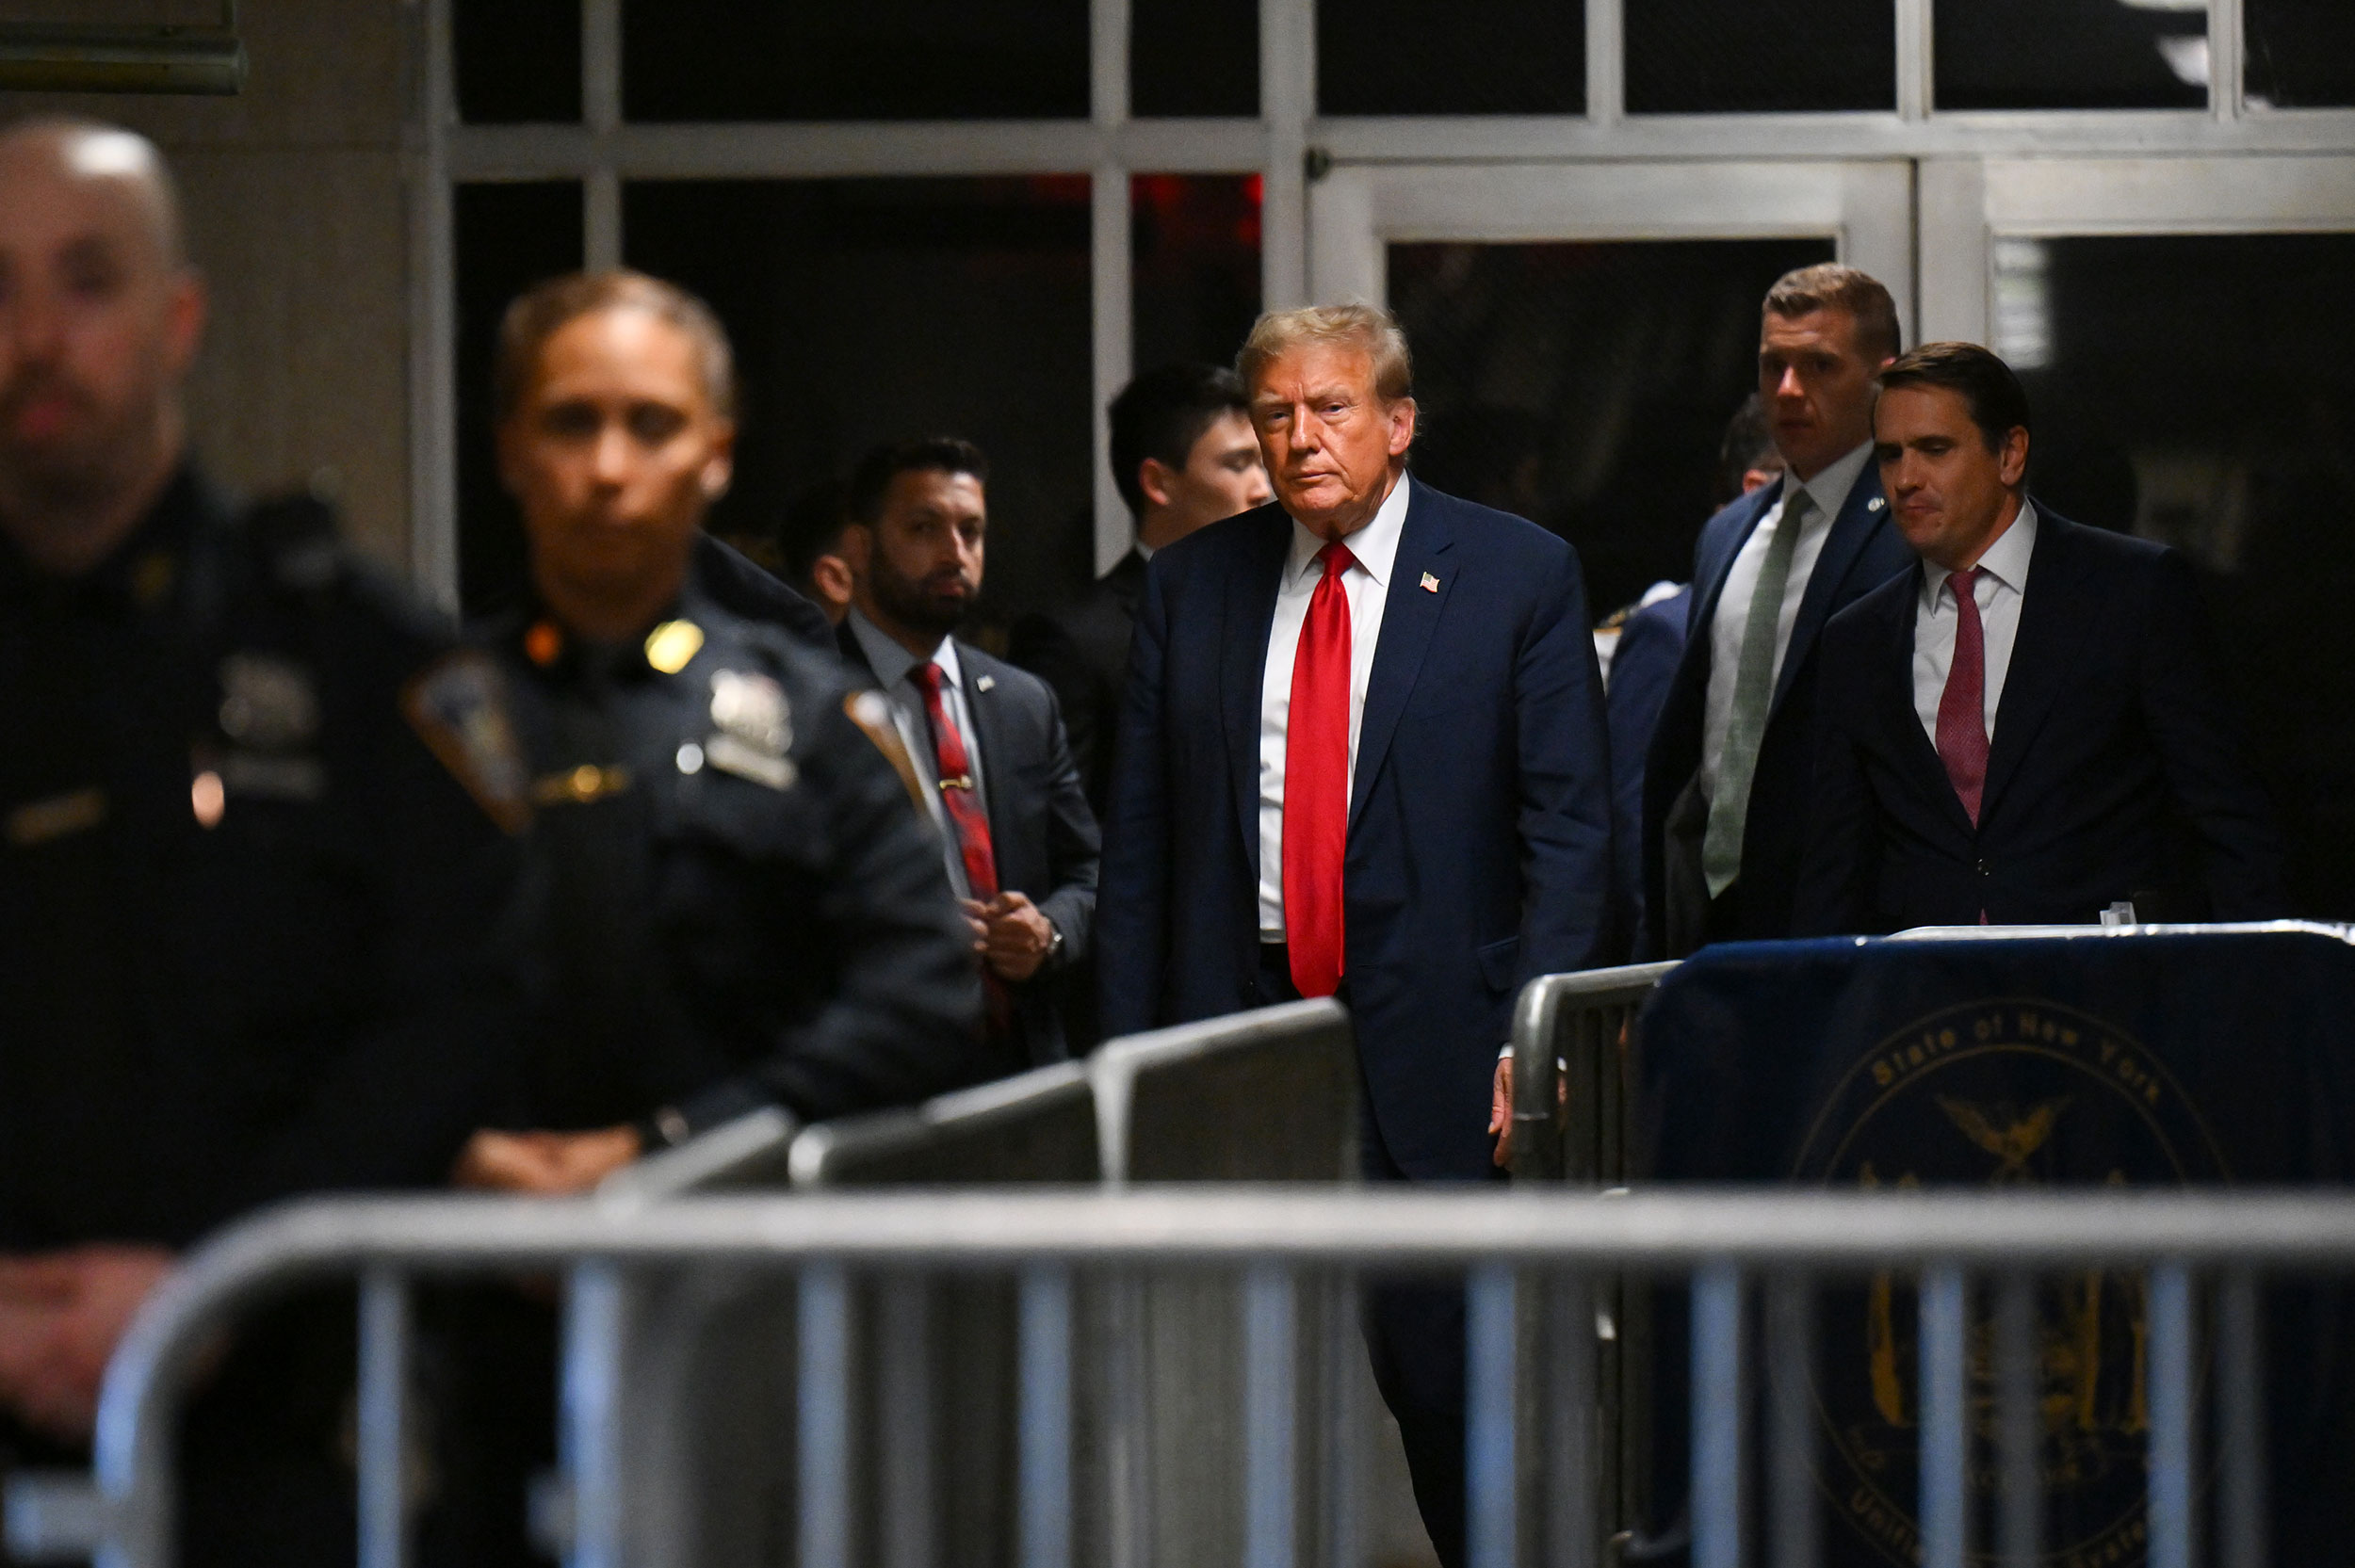 Former President Donald Trump leaves the courtroom after the first day of his criminal hush money trial in New York on Monday, April 15.